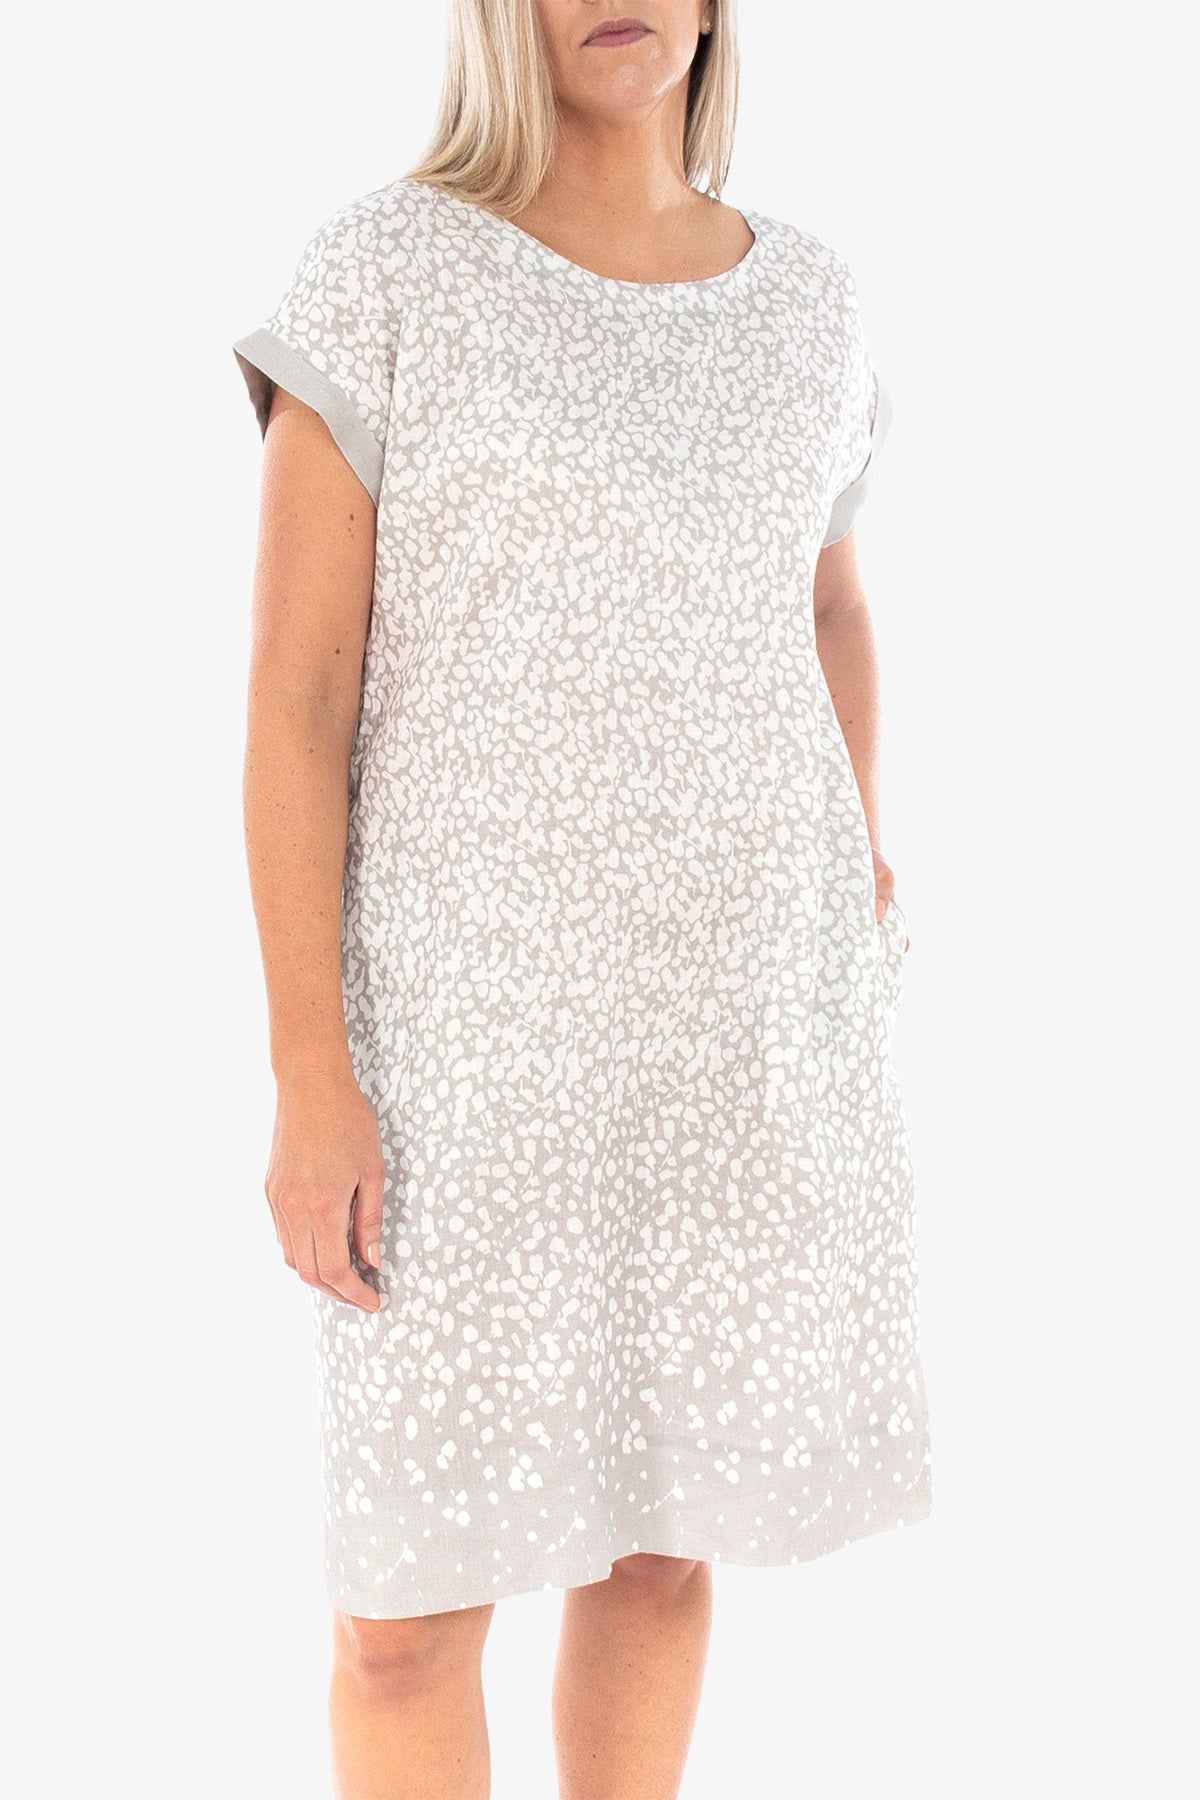 Painted Blossom Print Dress Silver and White